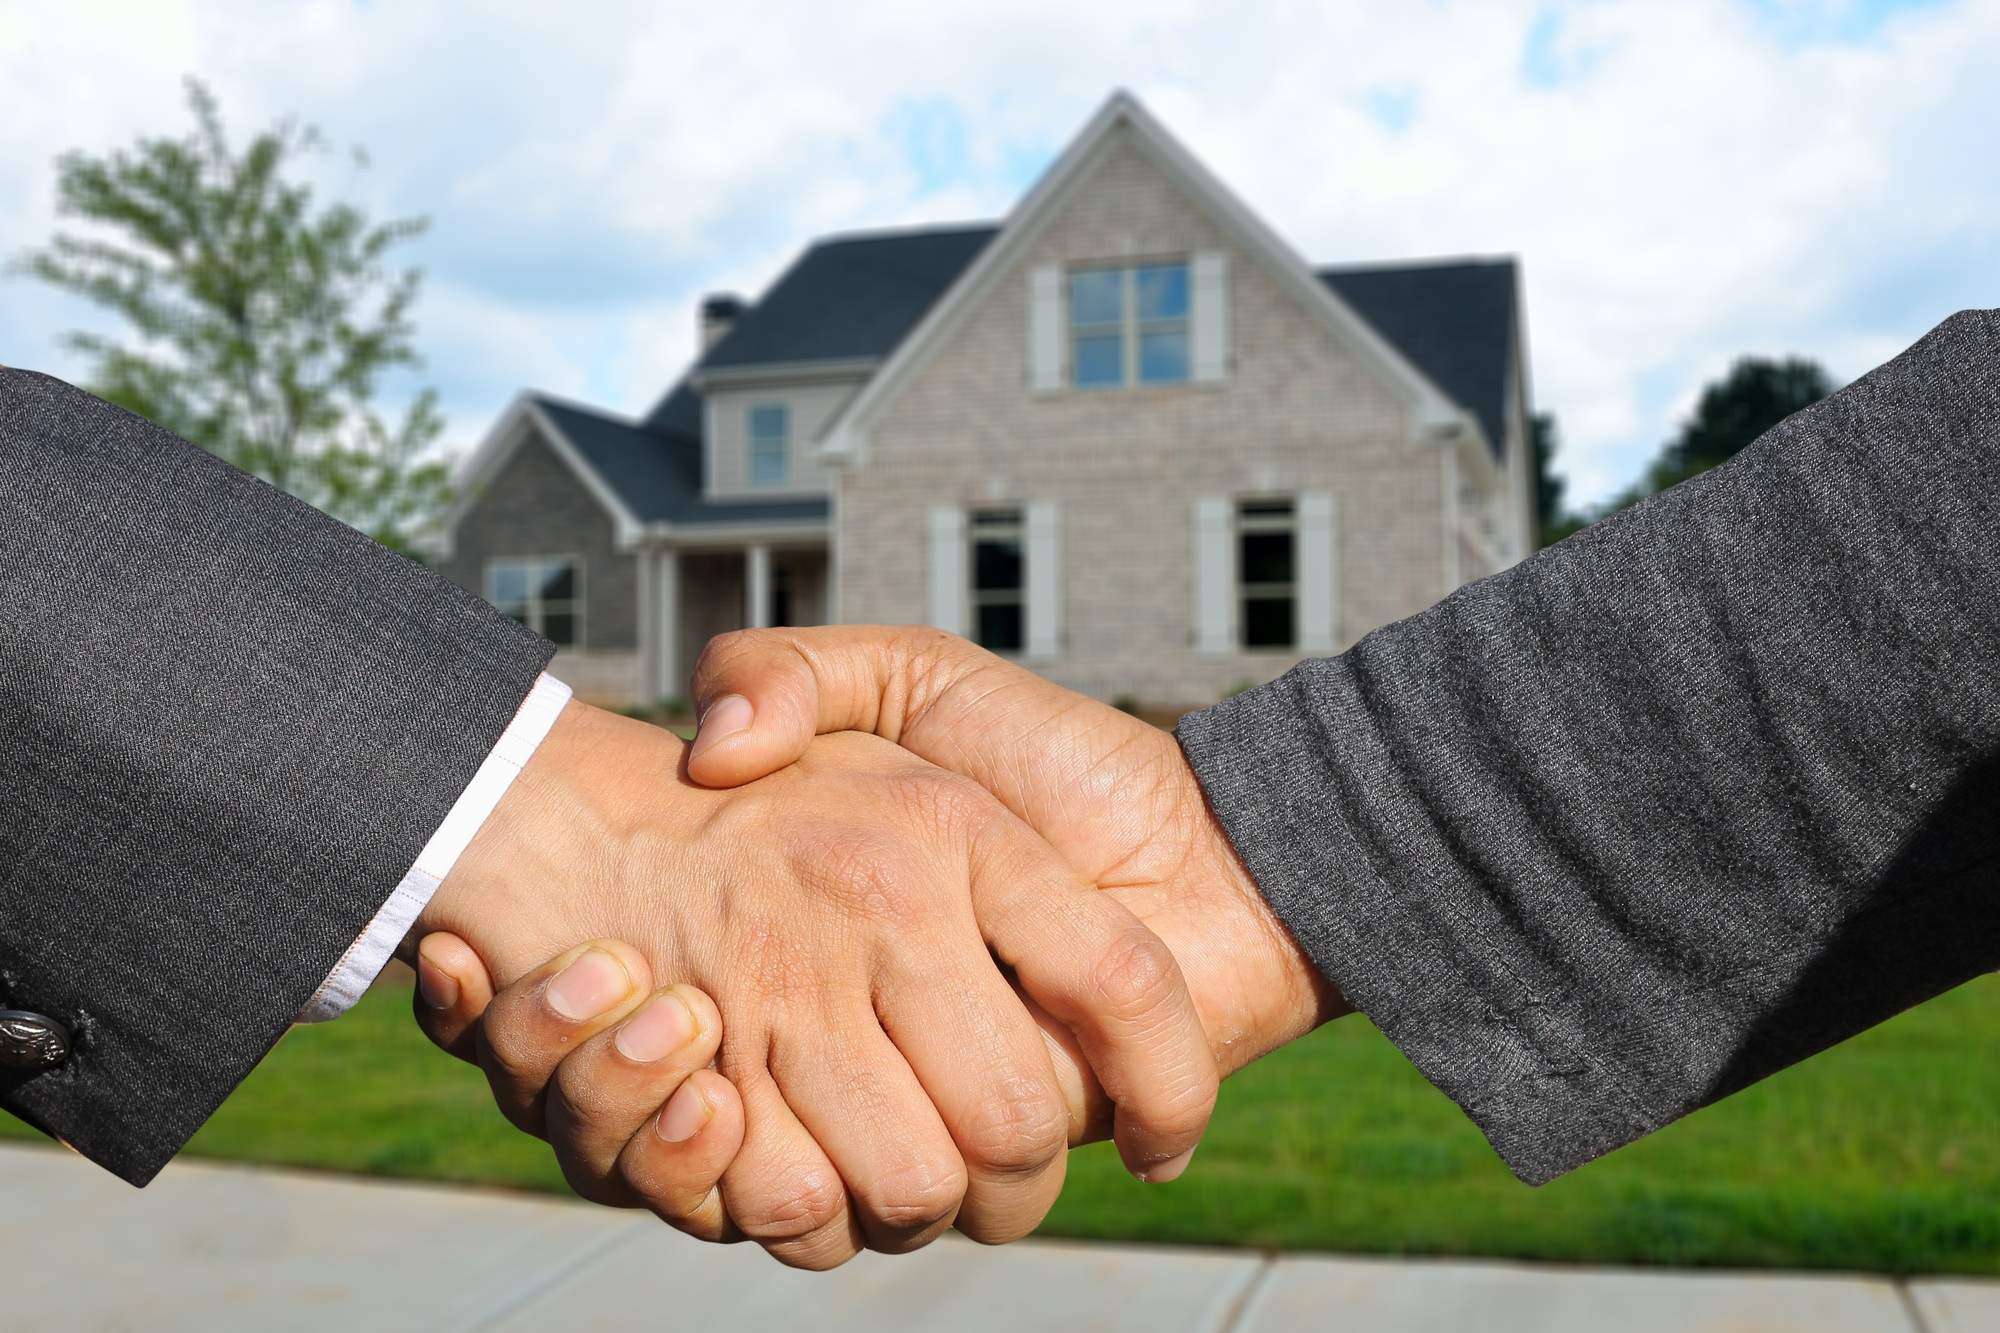 Top-Selling Real Estate Agents Near Me: How To Choose the Right One